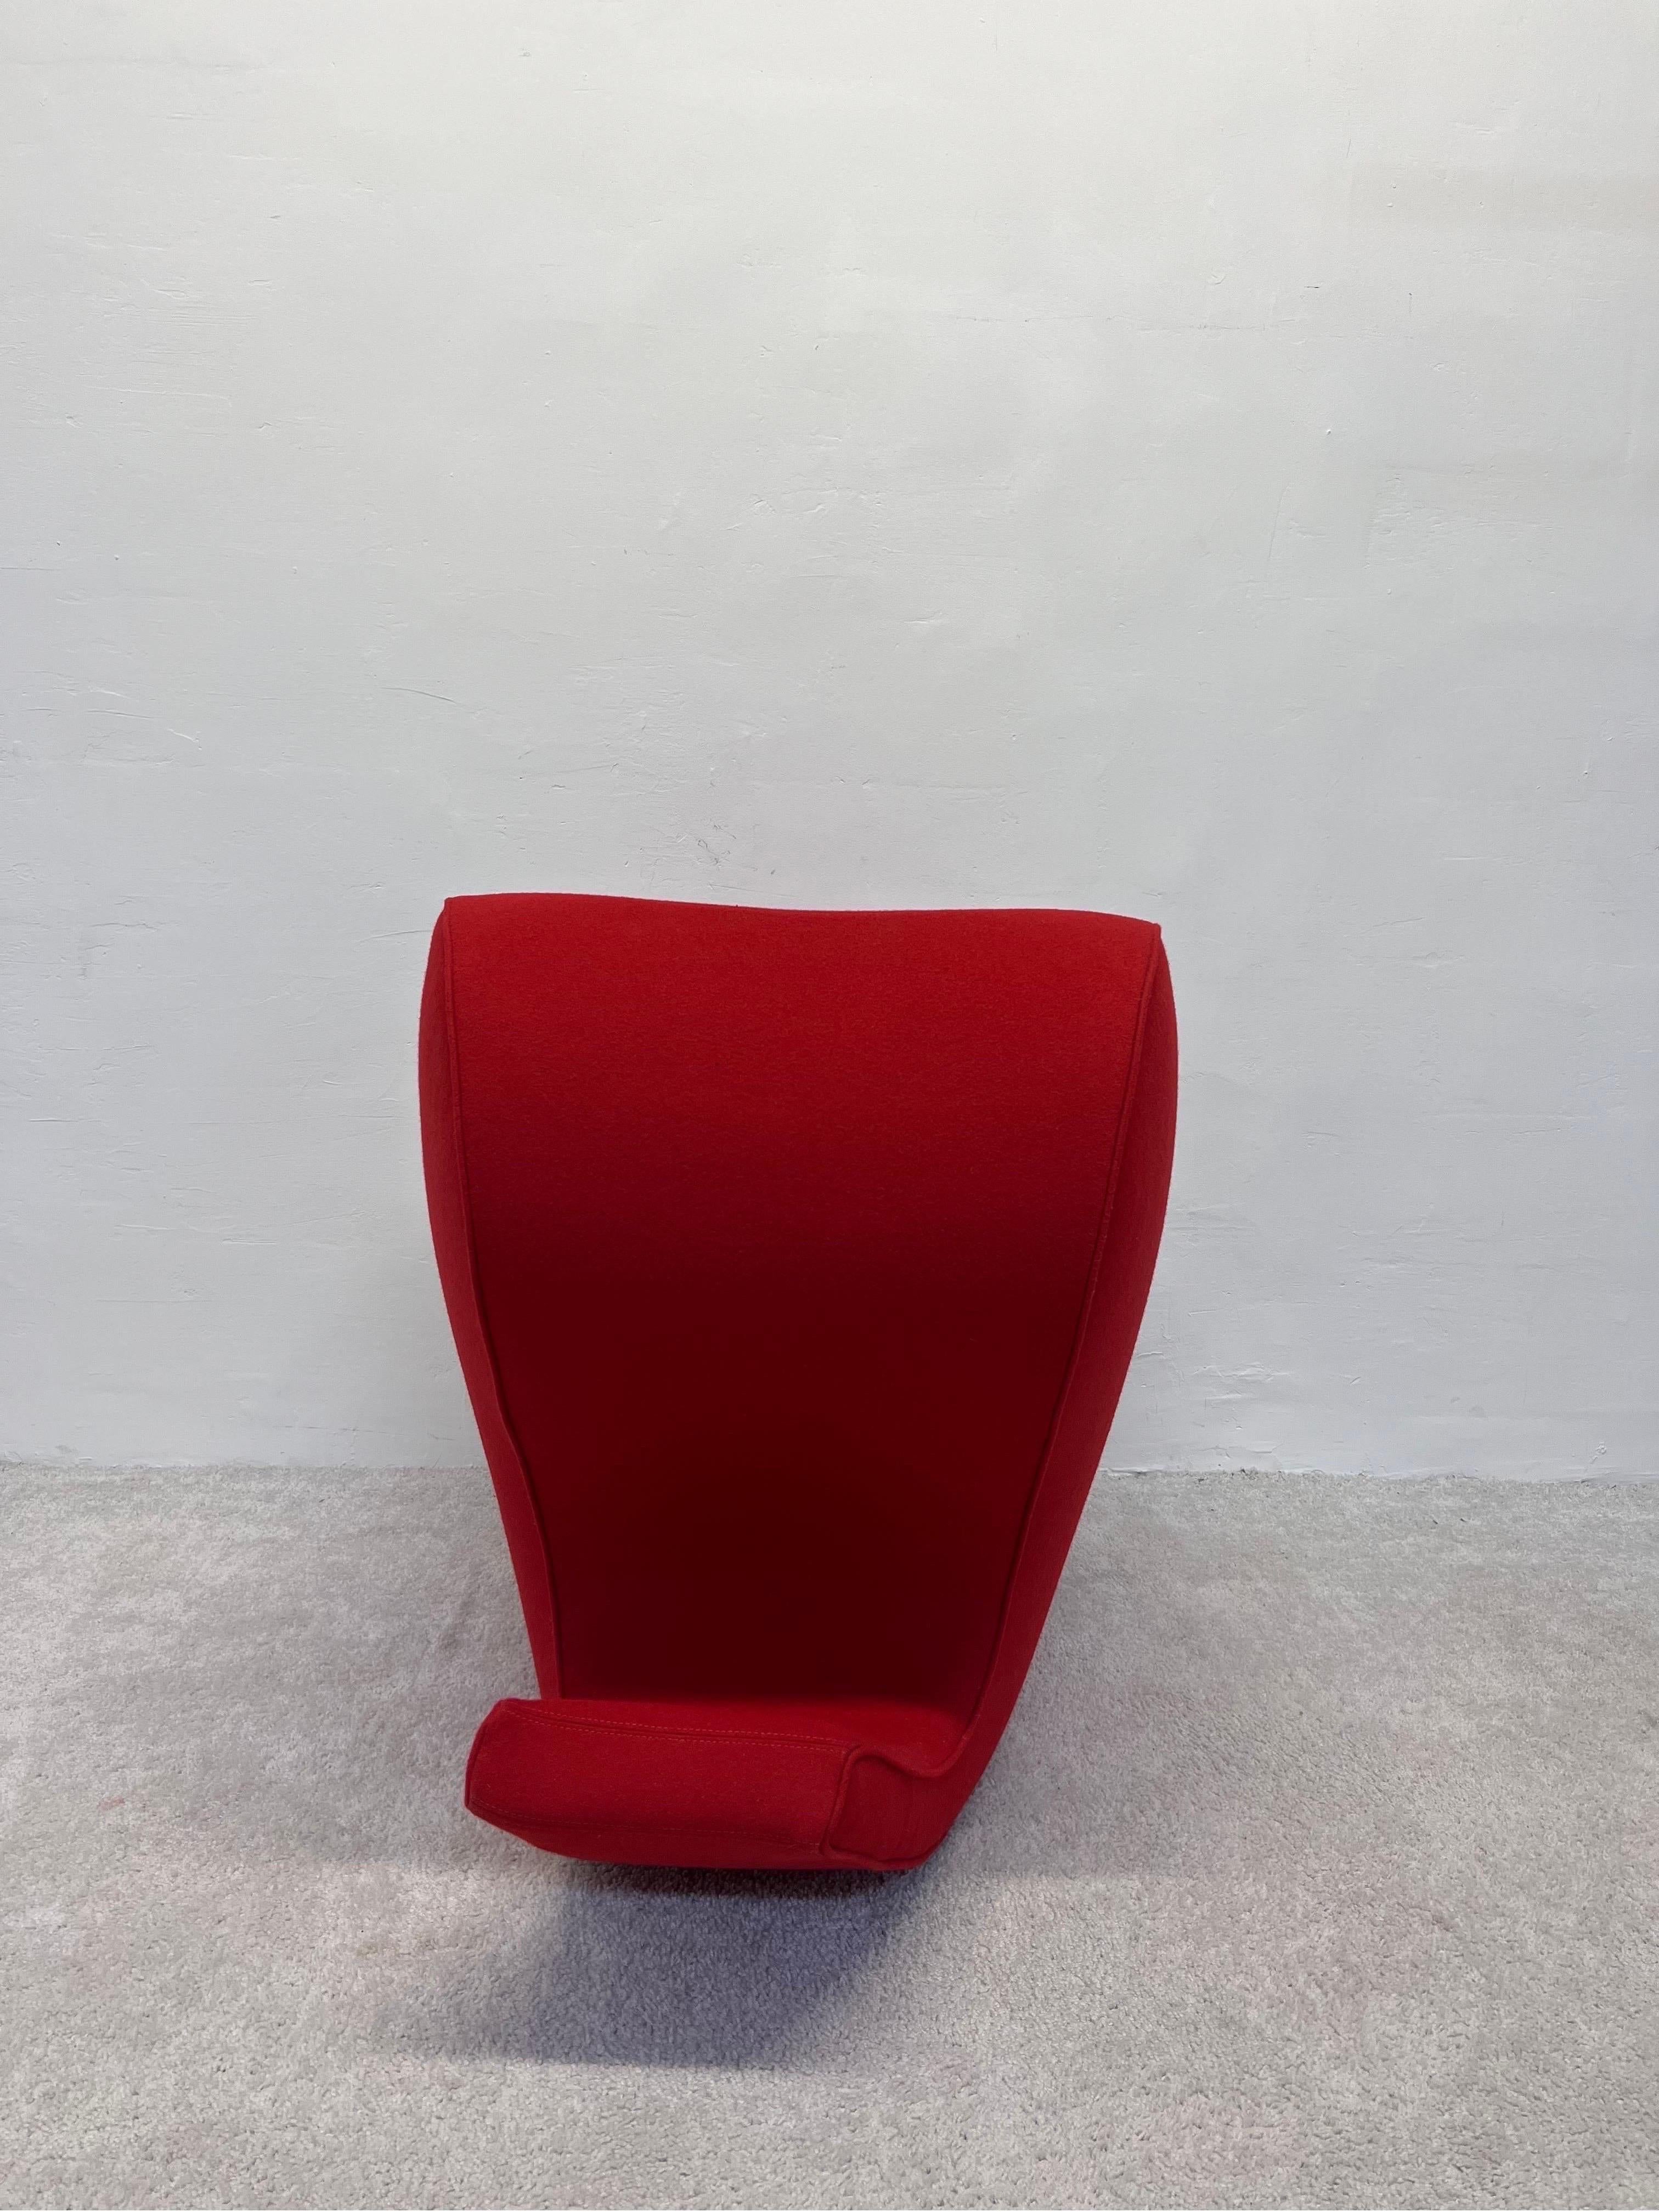 Steel Ron Arad Spring Collection Soft Heart Chair for Moroso For Sale